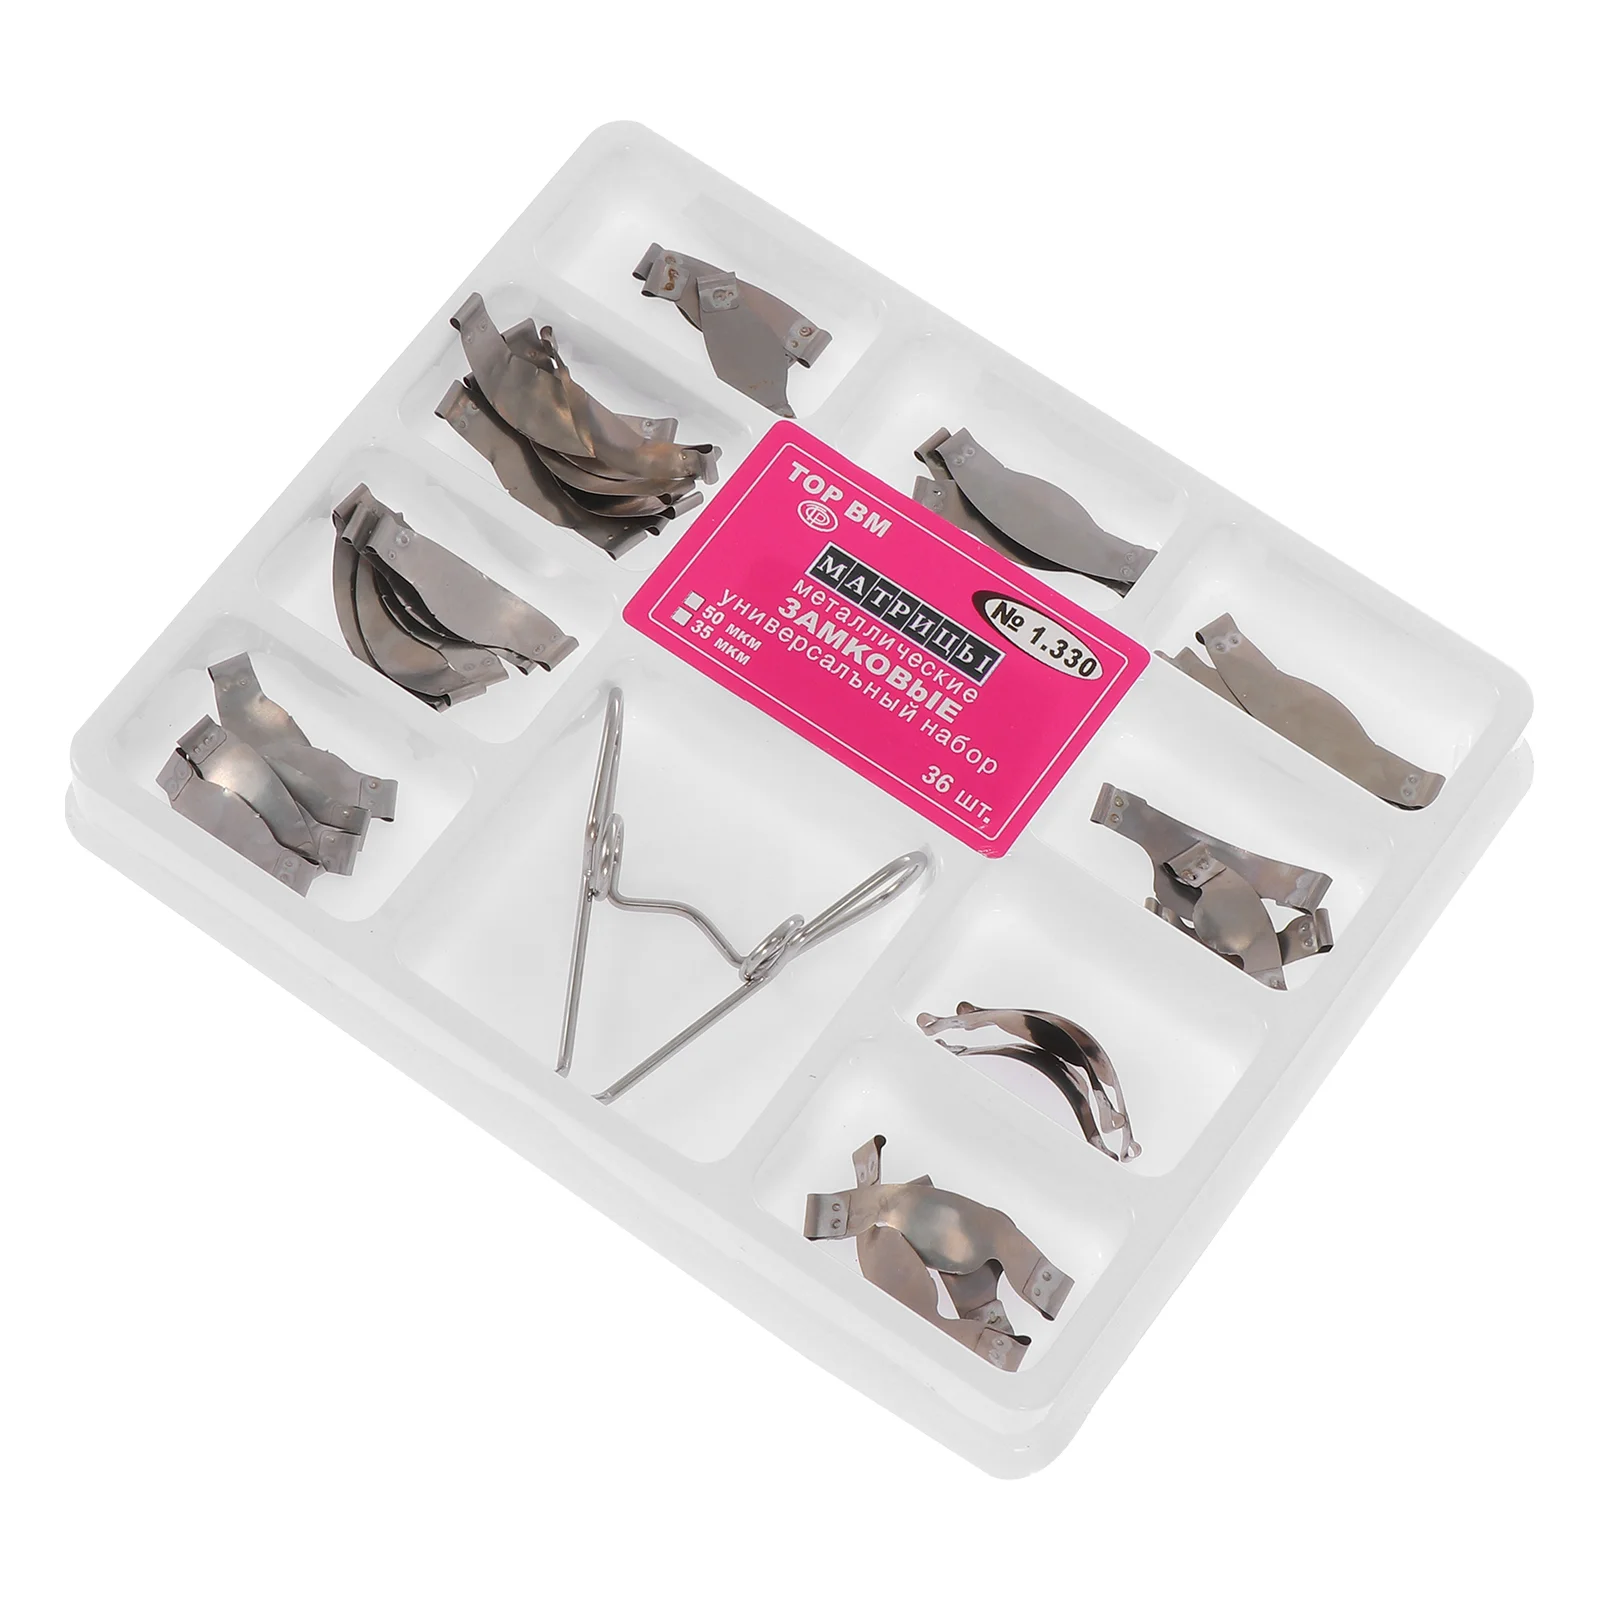 

Matricessupplies Sectional Contoured Teethmetal Bands Forming Toolsfill Refill Strips Polishing Dentistry Equipment Clinic